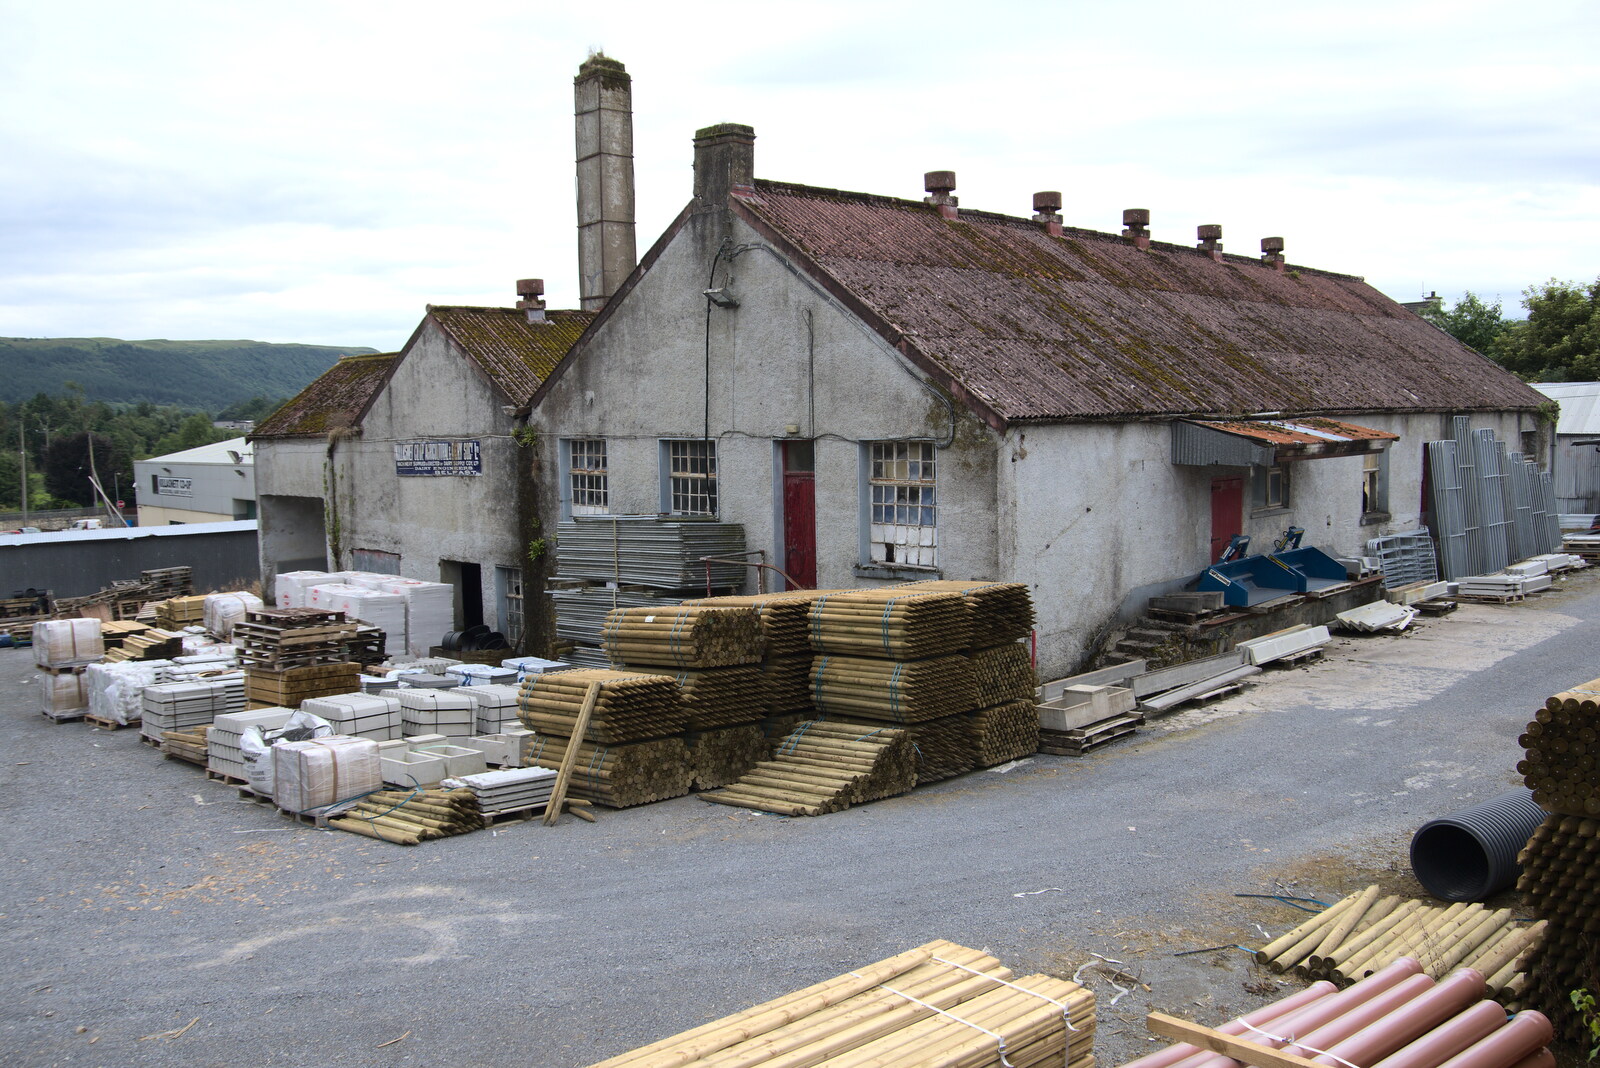 A Trip to Manorhamilton, County Leitrim, Ireland - 11th August 2021: A mix of derliction and new building materials